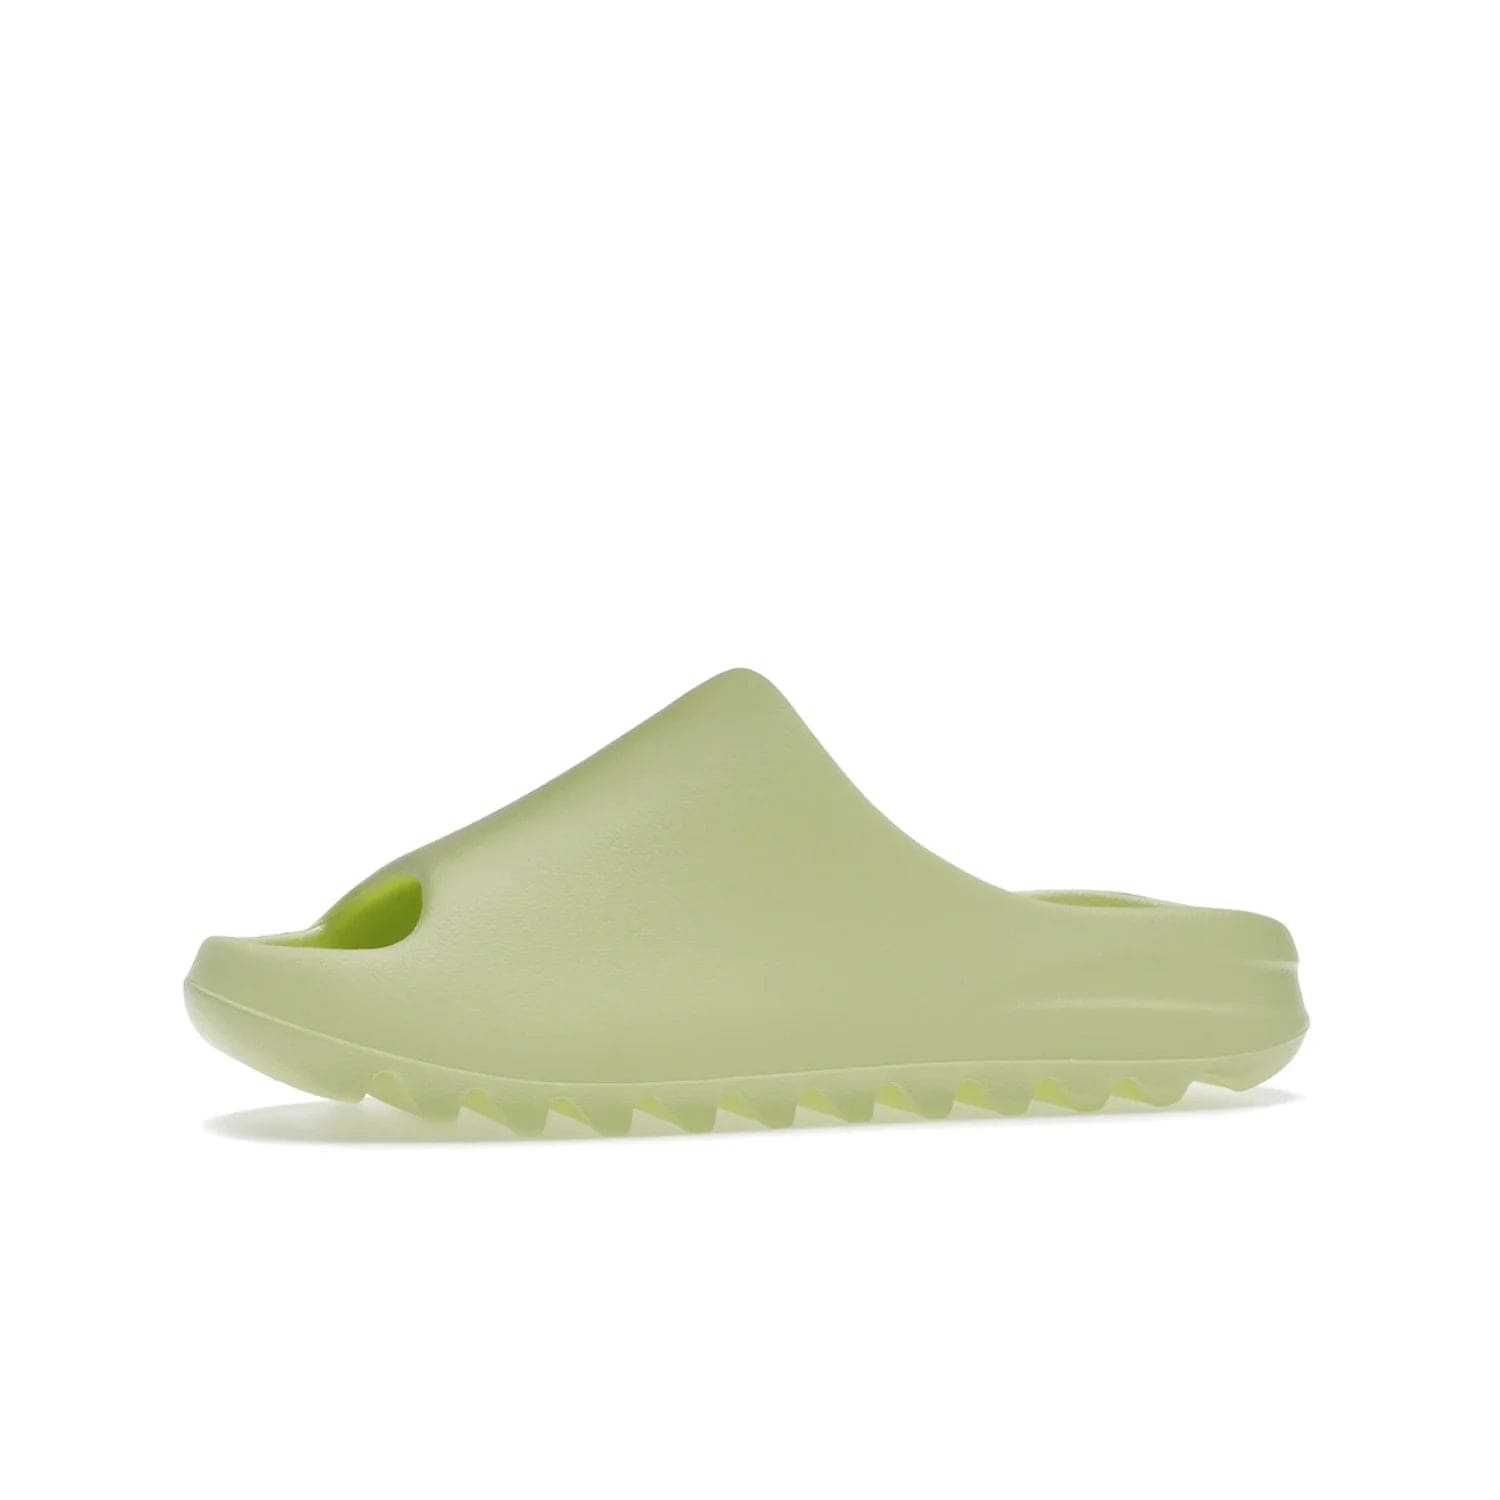 adidas Yeezy Slide Glow Green (2022) (Restock) - Image 17 - Only at www.BallersClubKickz.com - #
Introducing the Adidas Yeezy Slide Glow Green (2022) Restock. Offering ultimate comfort & responsive style with its grooved outsole. Grab your pair on May 2022 for an unforgettable addition to your sneaker collection. US and UK sizes the same.